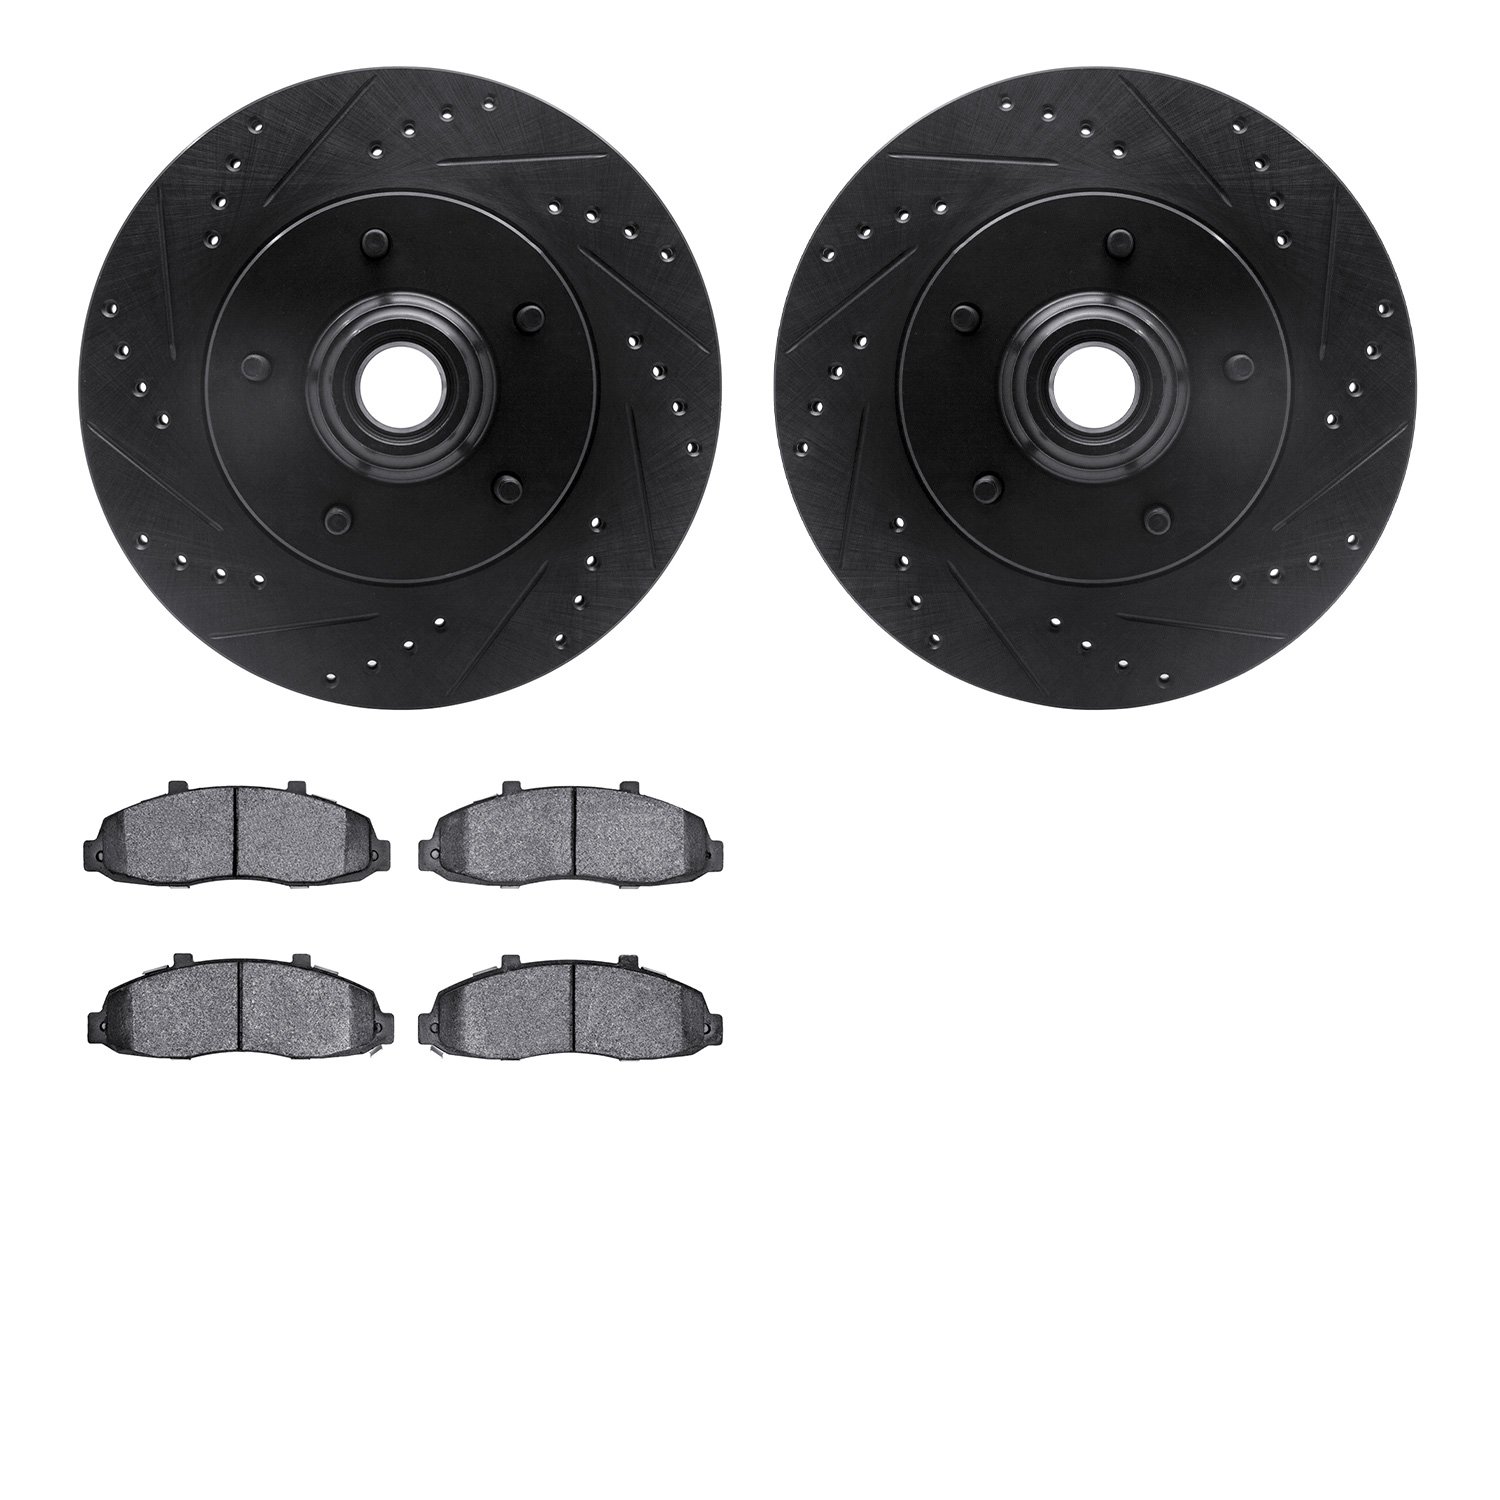 8402-54033 Drilled/Slotted Brake Rotors with Ultimate-Duty Brake Pads Kit [Black], 1997-1999 Ford/Lincoln/Mercury/Mazda, Positio